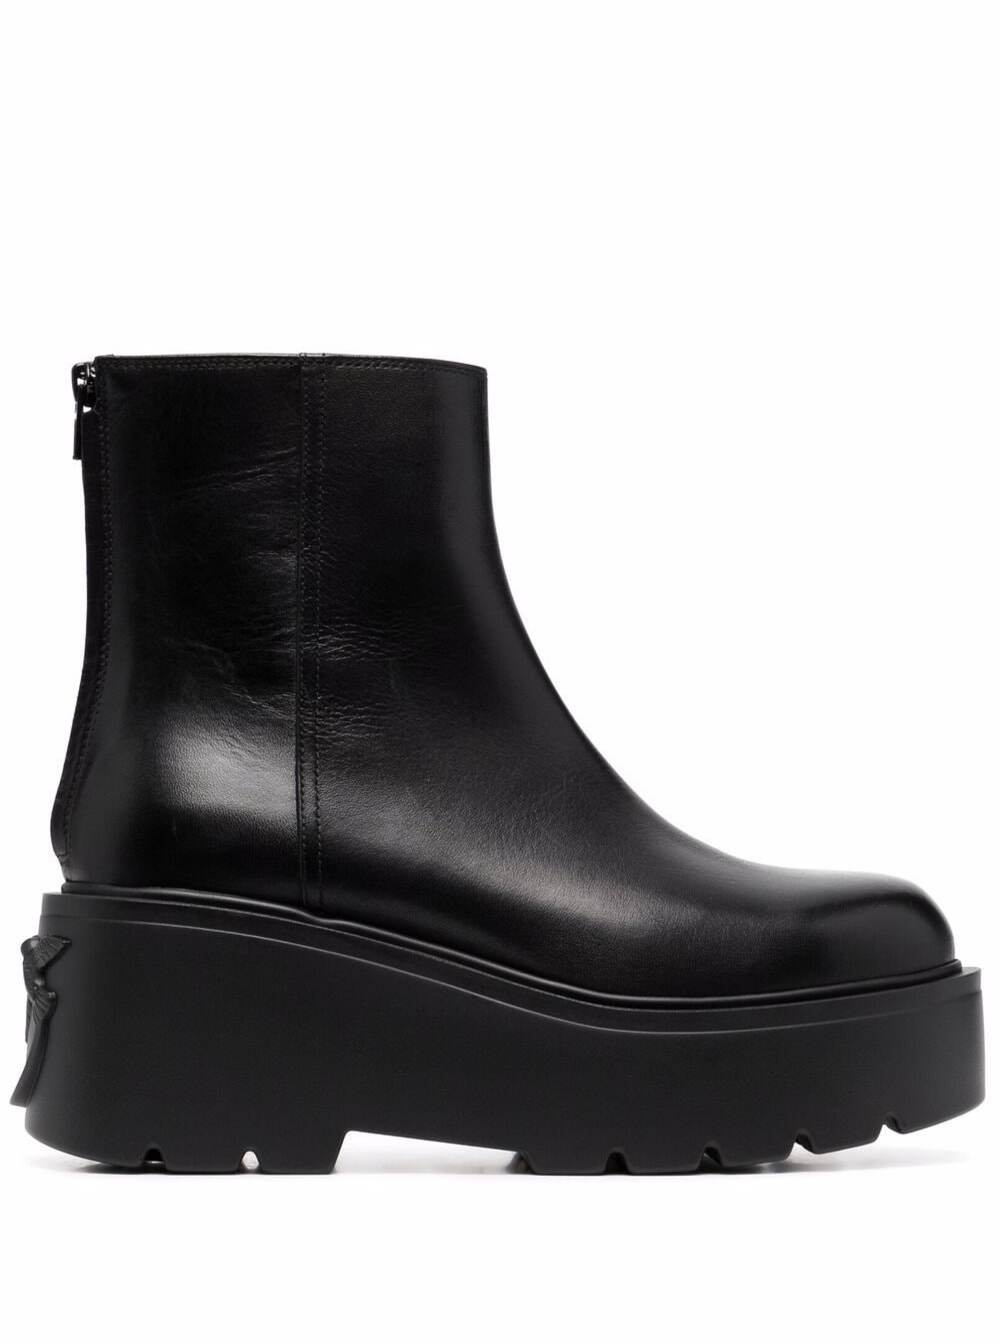 Pinko Bahia Black Leather Ankle Boots With Oversize Sole